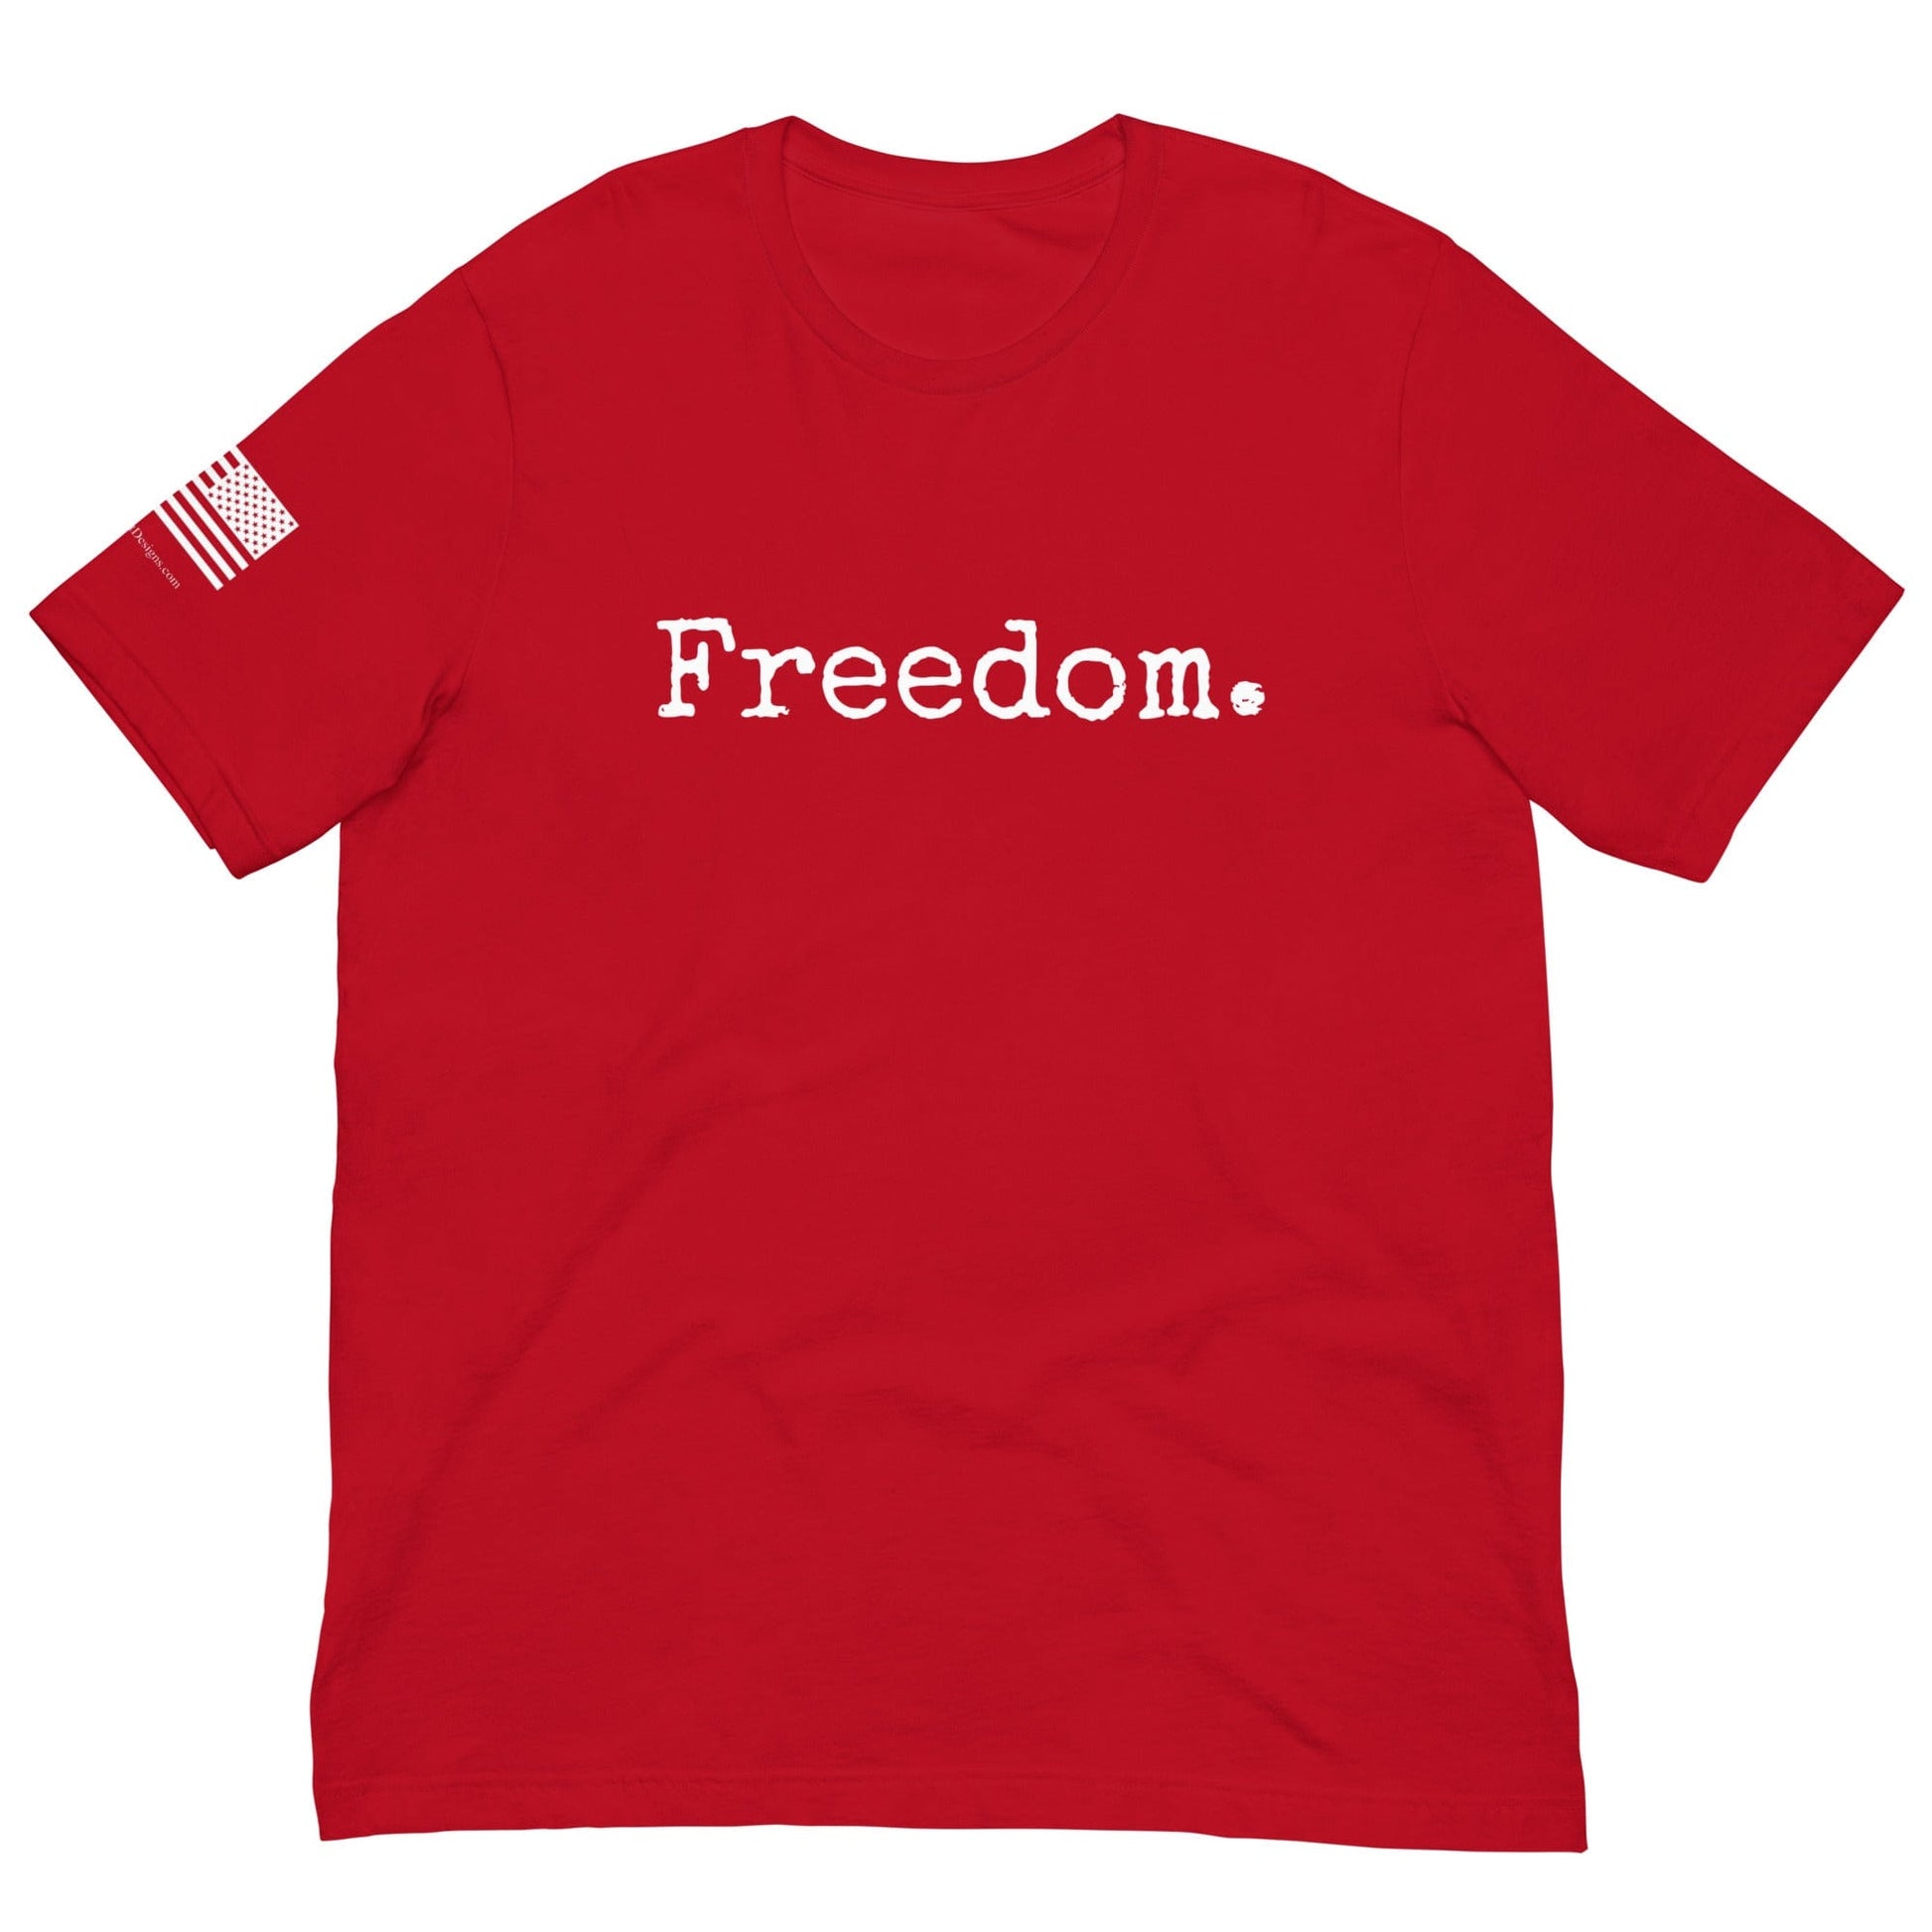 FreedomKat Designs T-Shirt Red / S Freedom.